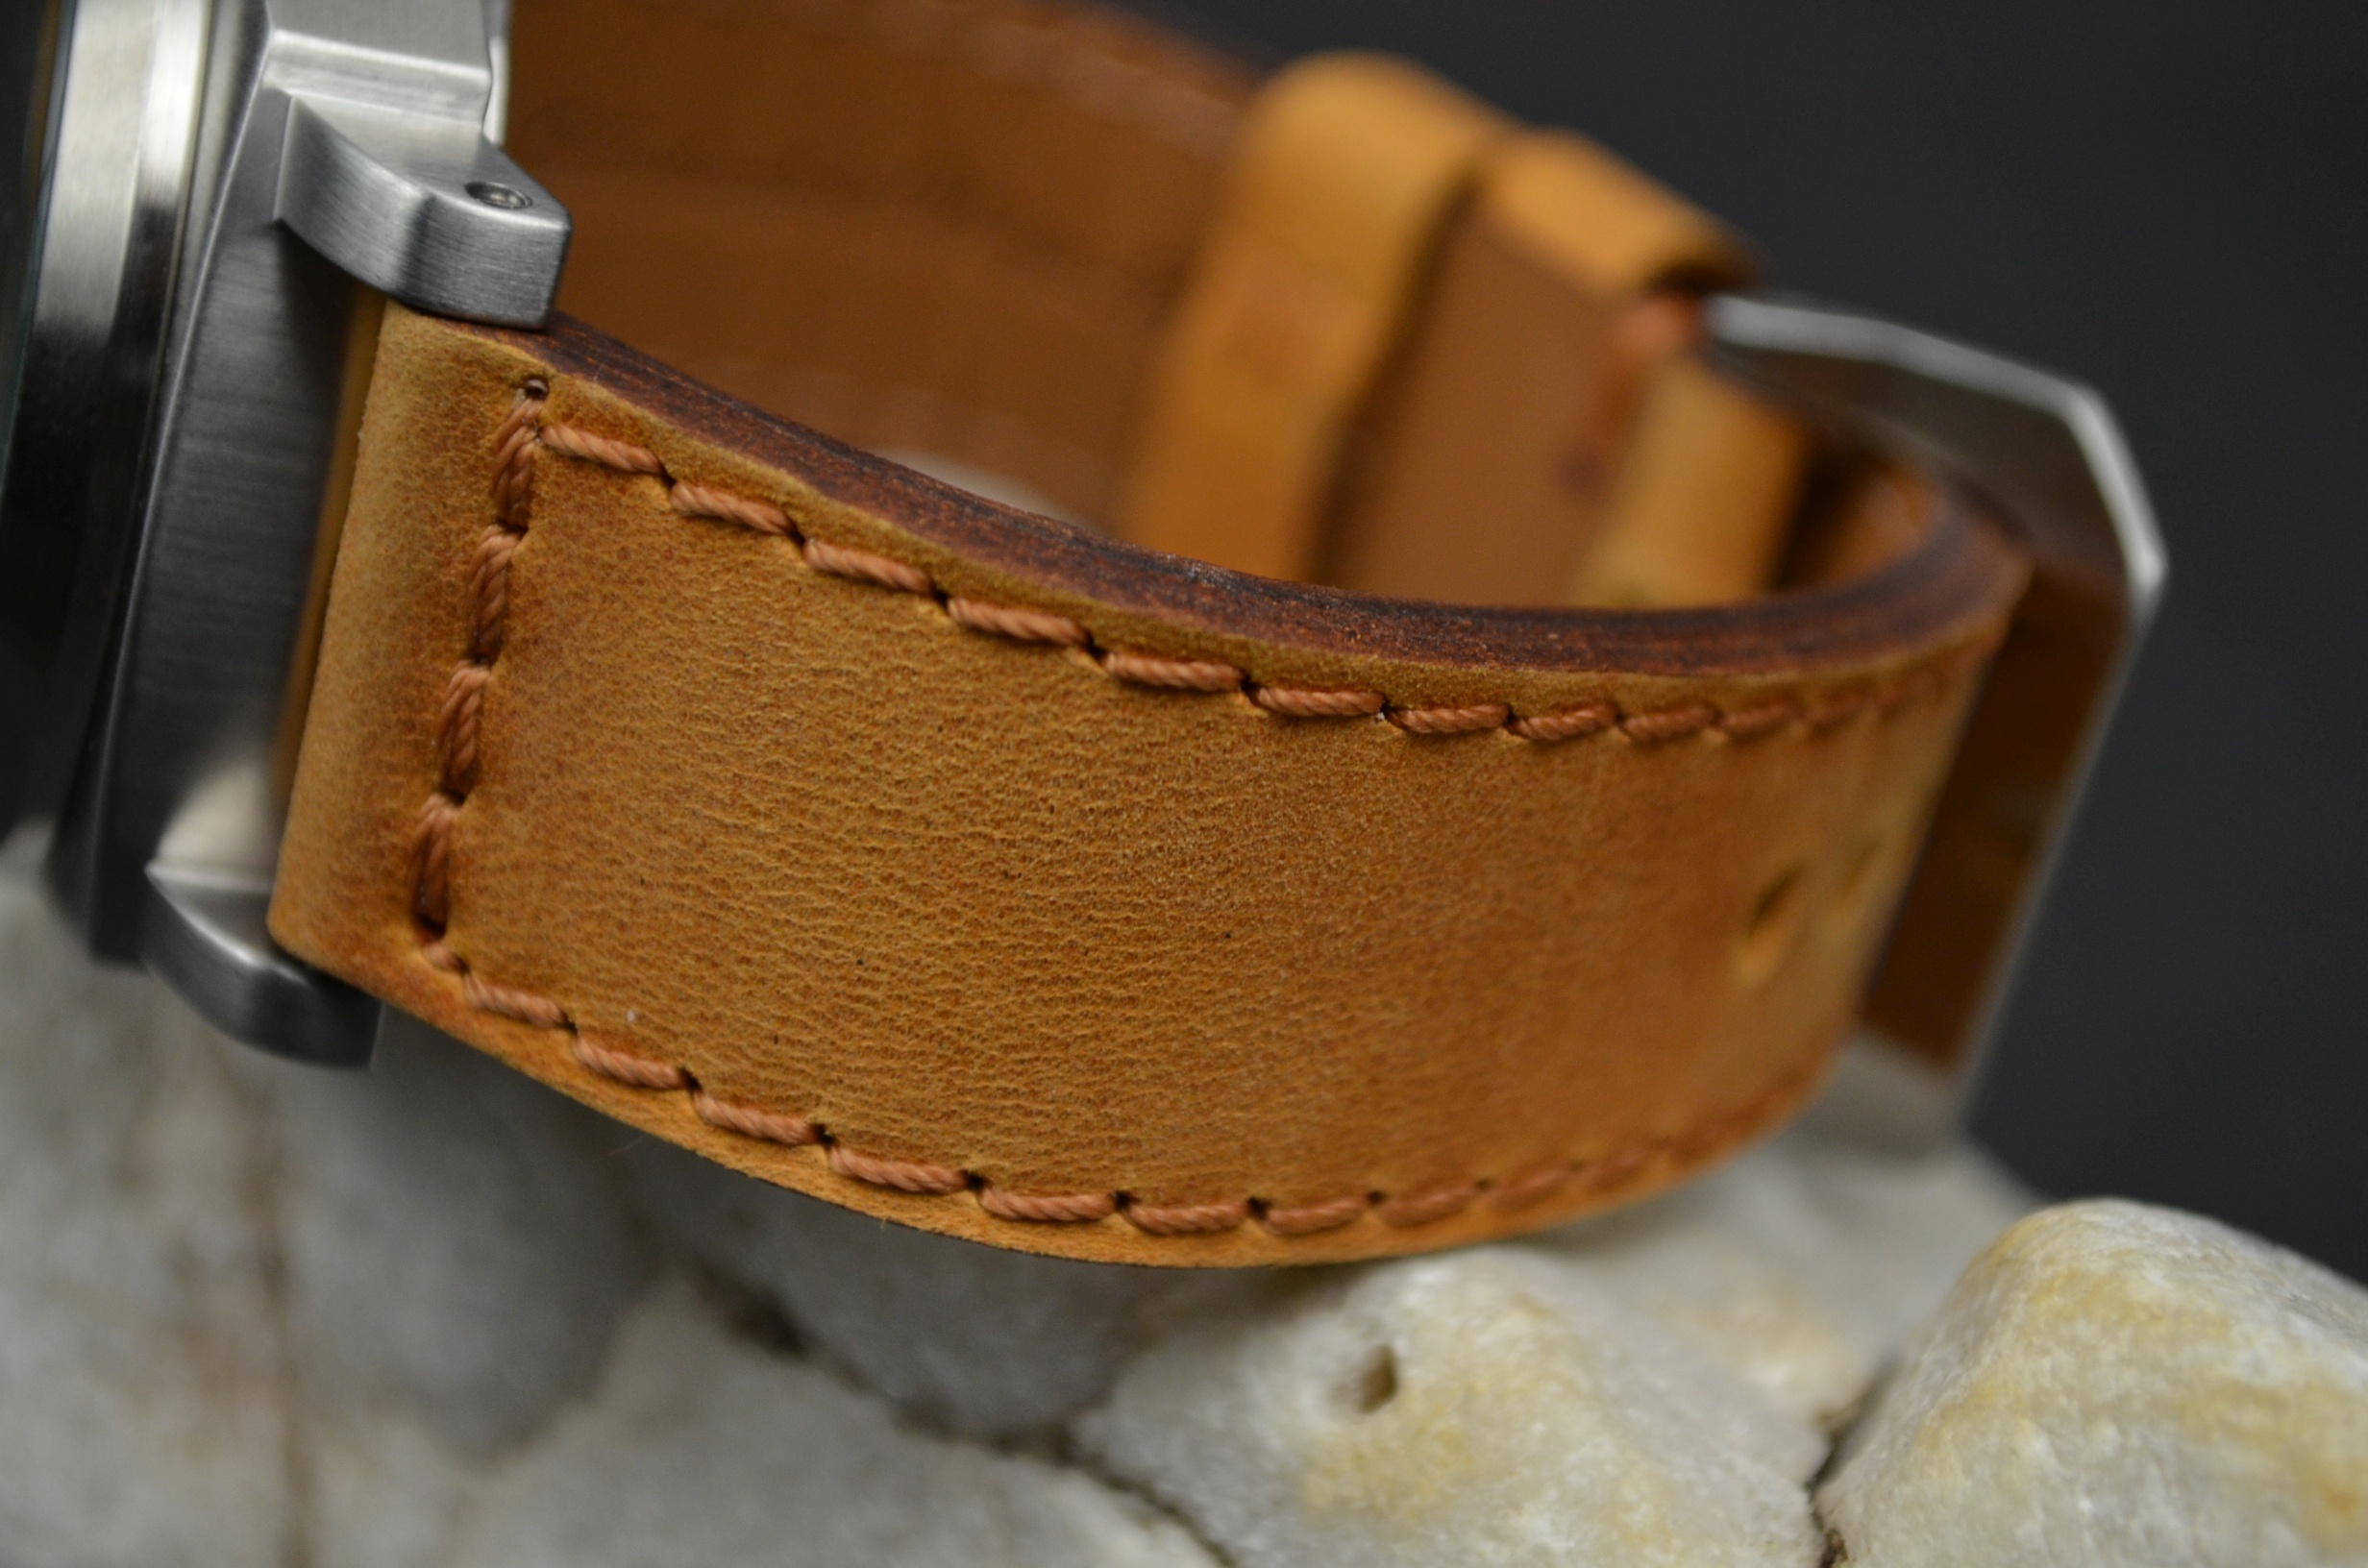 HAZELNUT is one of our hand crafted watch straps. Available in hazelnut color, 3.5 - 4 mm thick.